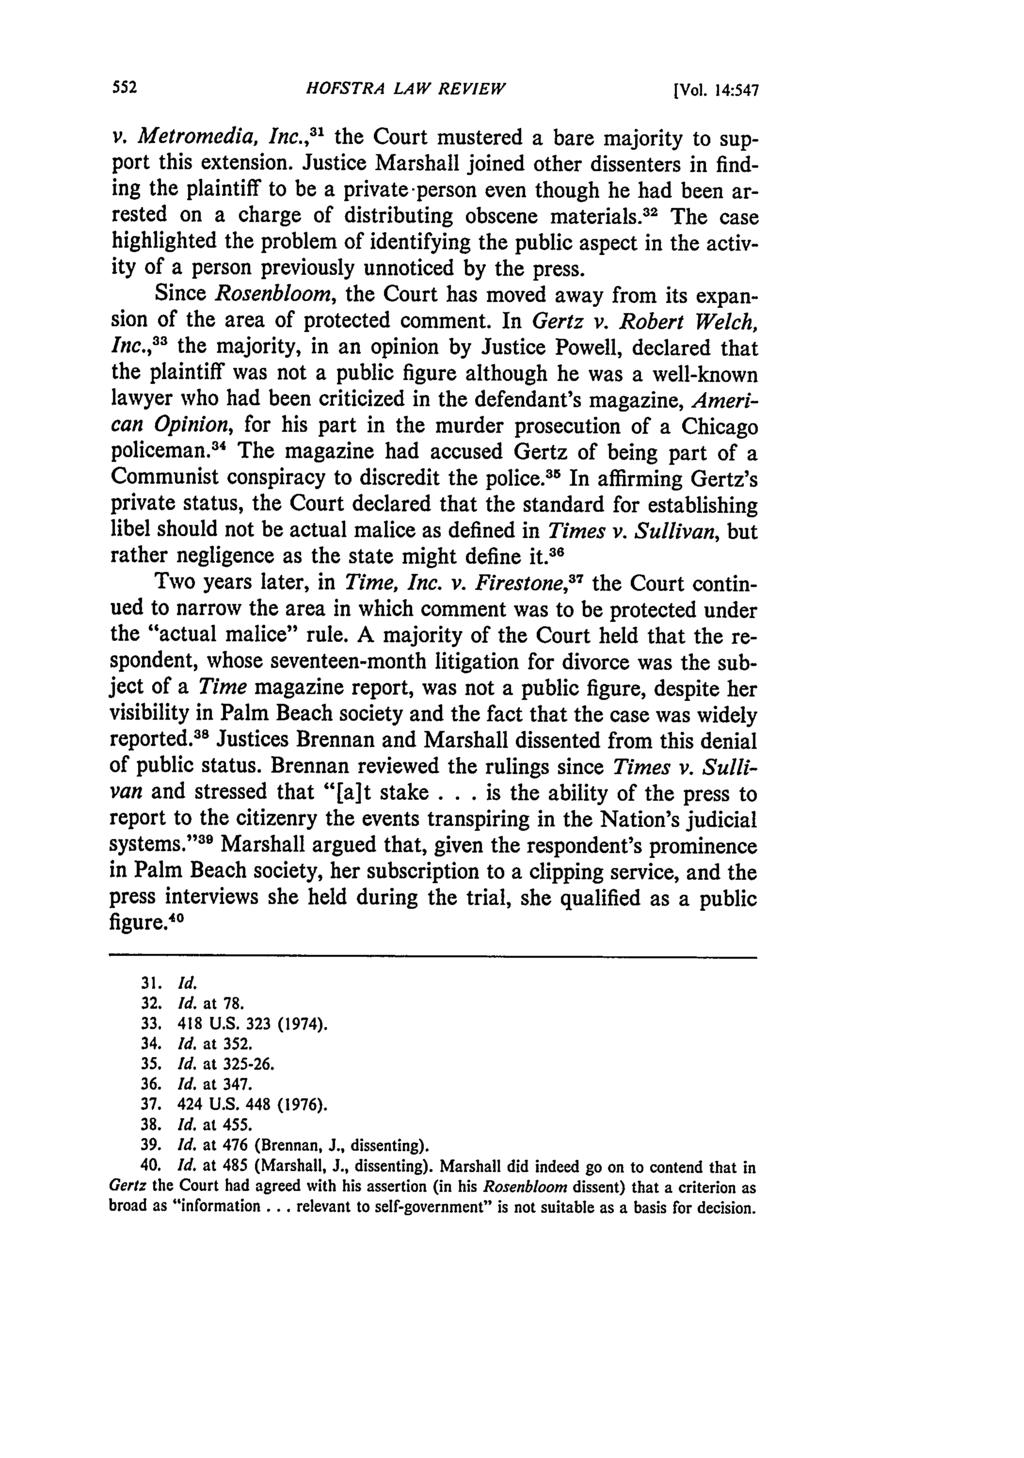 Hofstra Law Review, Vol. 14, Iss. 3 [1986], Art. 3 HOFSTRA LAW REVIEW [Vol. 14:547 v. Metromedia, Inc., 31 the Court mustered a bare majority to support this extension.